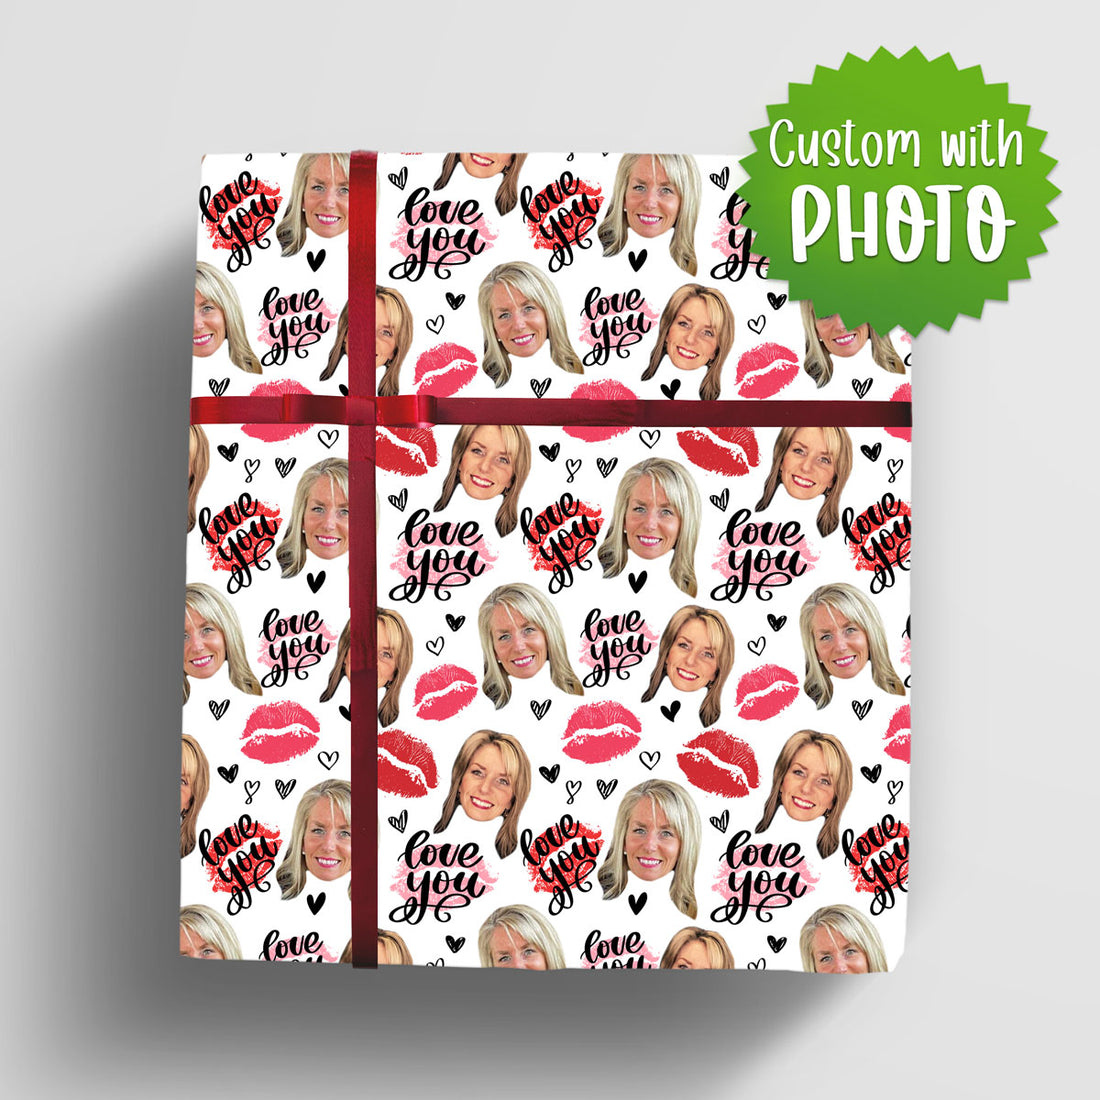 Custom wrapping paper for Valentines Day Gifts for him or her Check out our Custom Valentines Day wrapping paper designs made especially for Valentine's Day Gifts for Him or Her